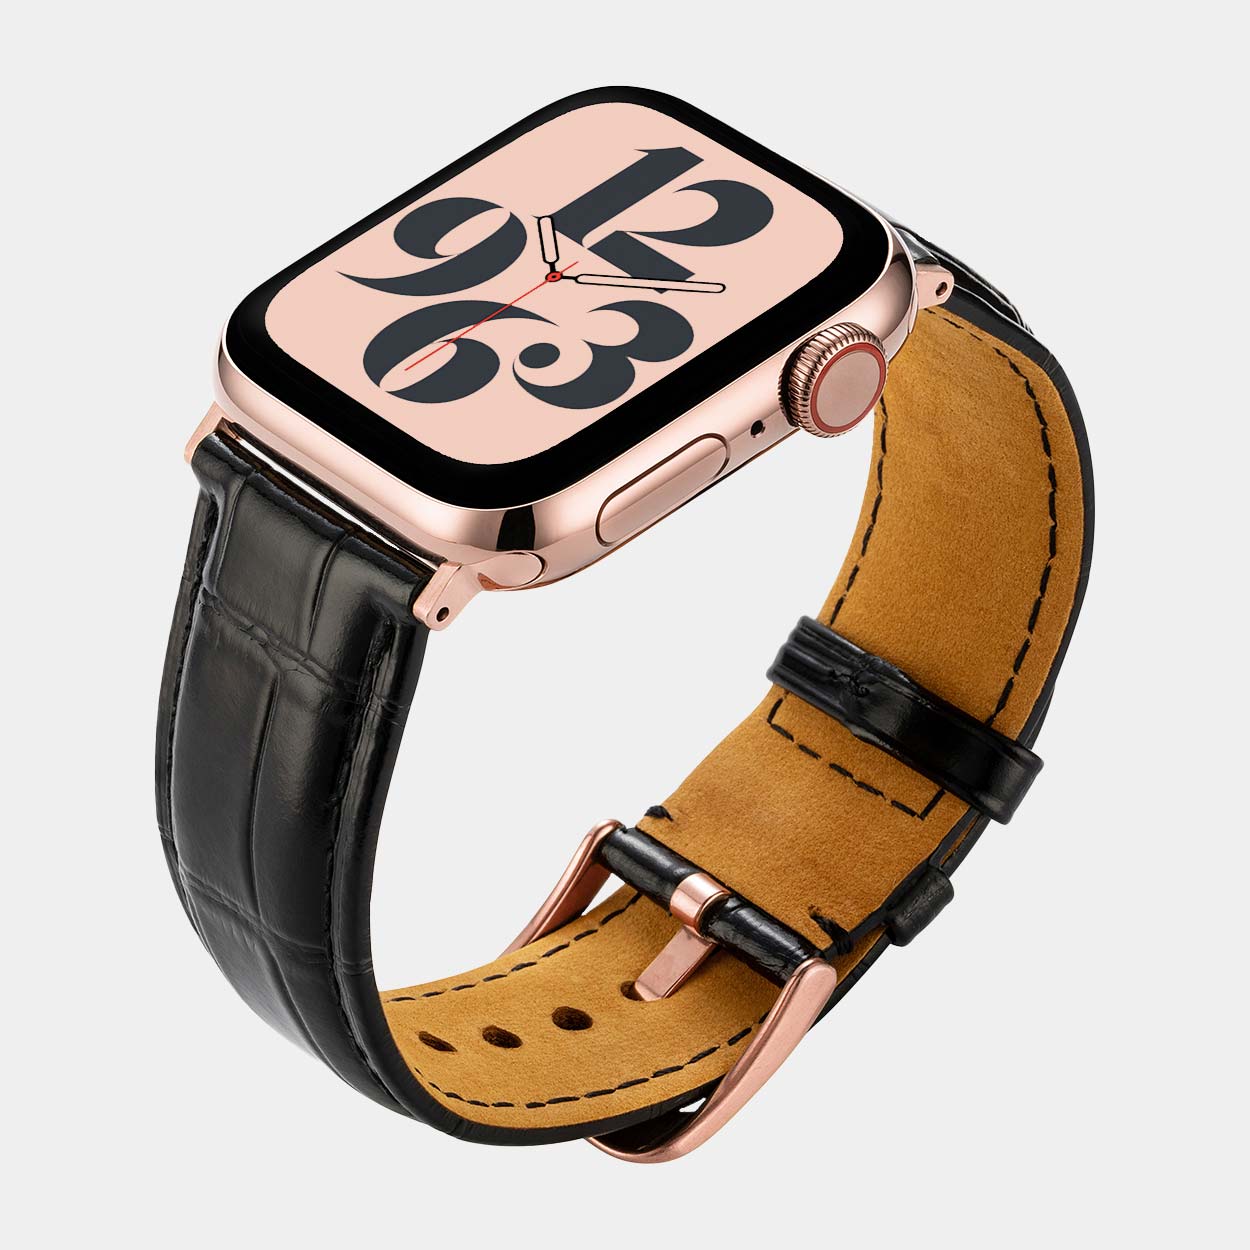 Pre-Loved Miam Apple Watch Straps Black, Brown or Pink - Buckle & Band - PL-MIA-38-BLK-RG